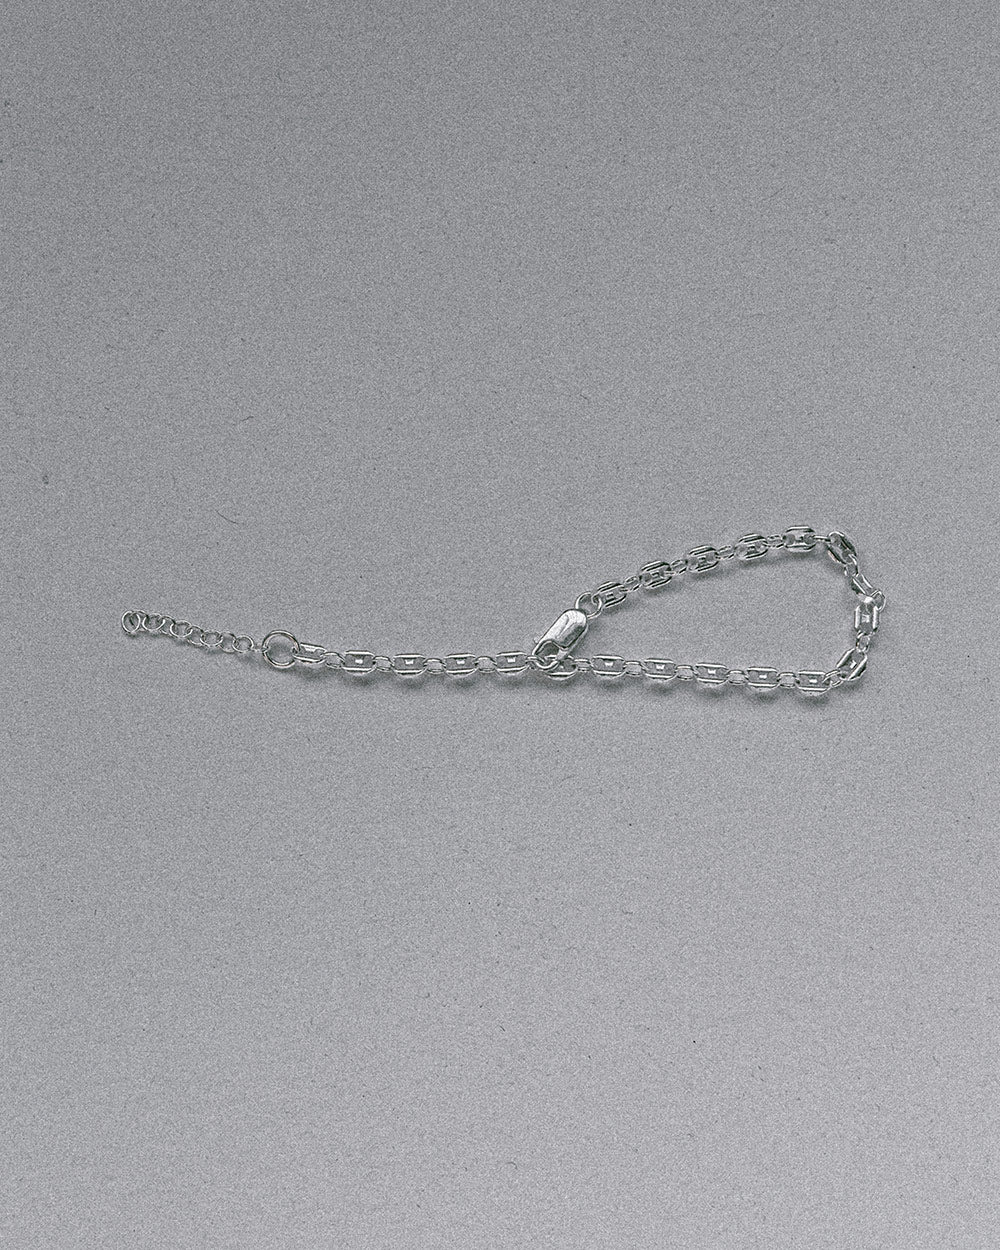 sterling silver bracelet clasp can be used on any of the links to adjust size up to 8" or smaller